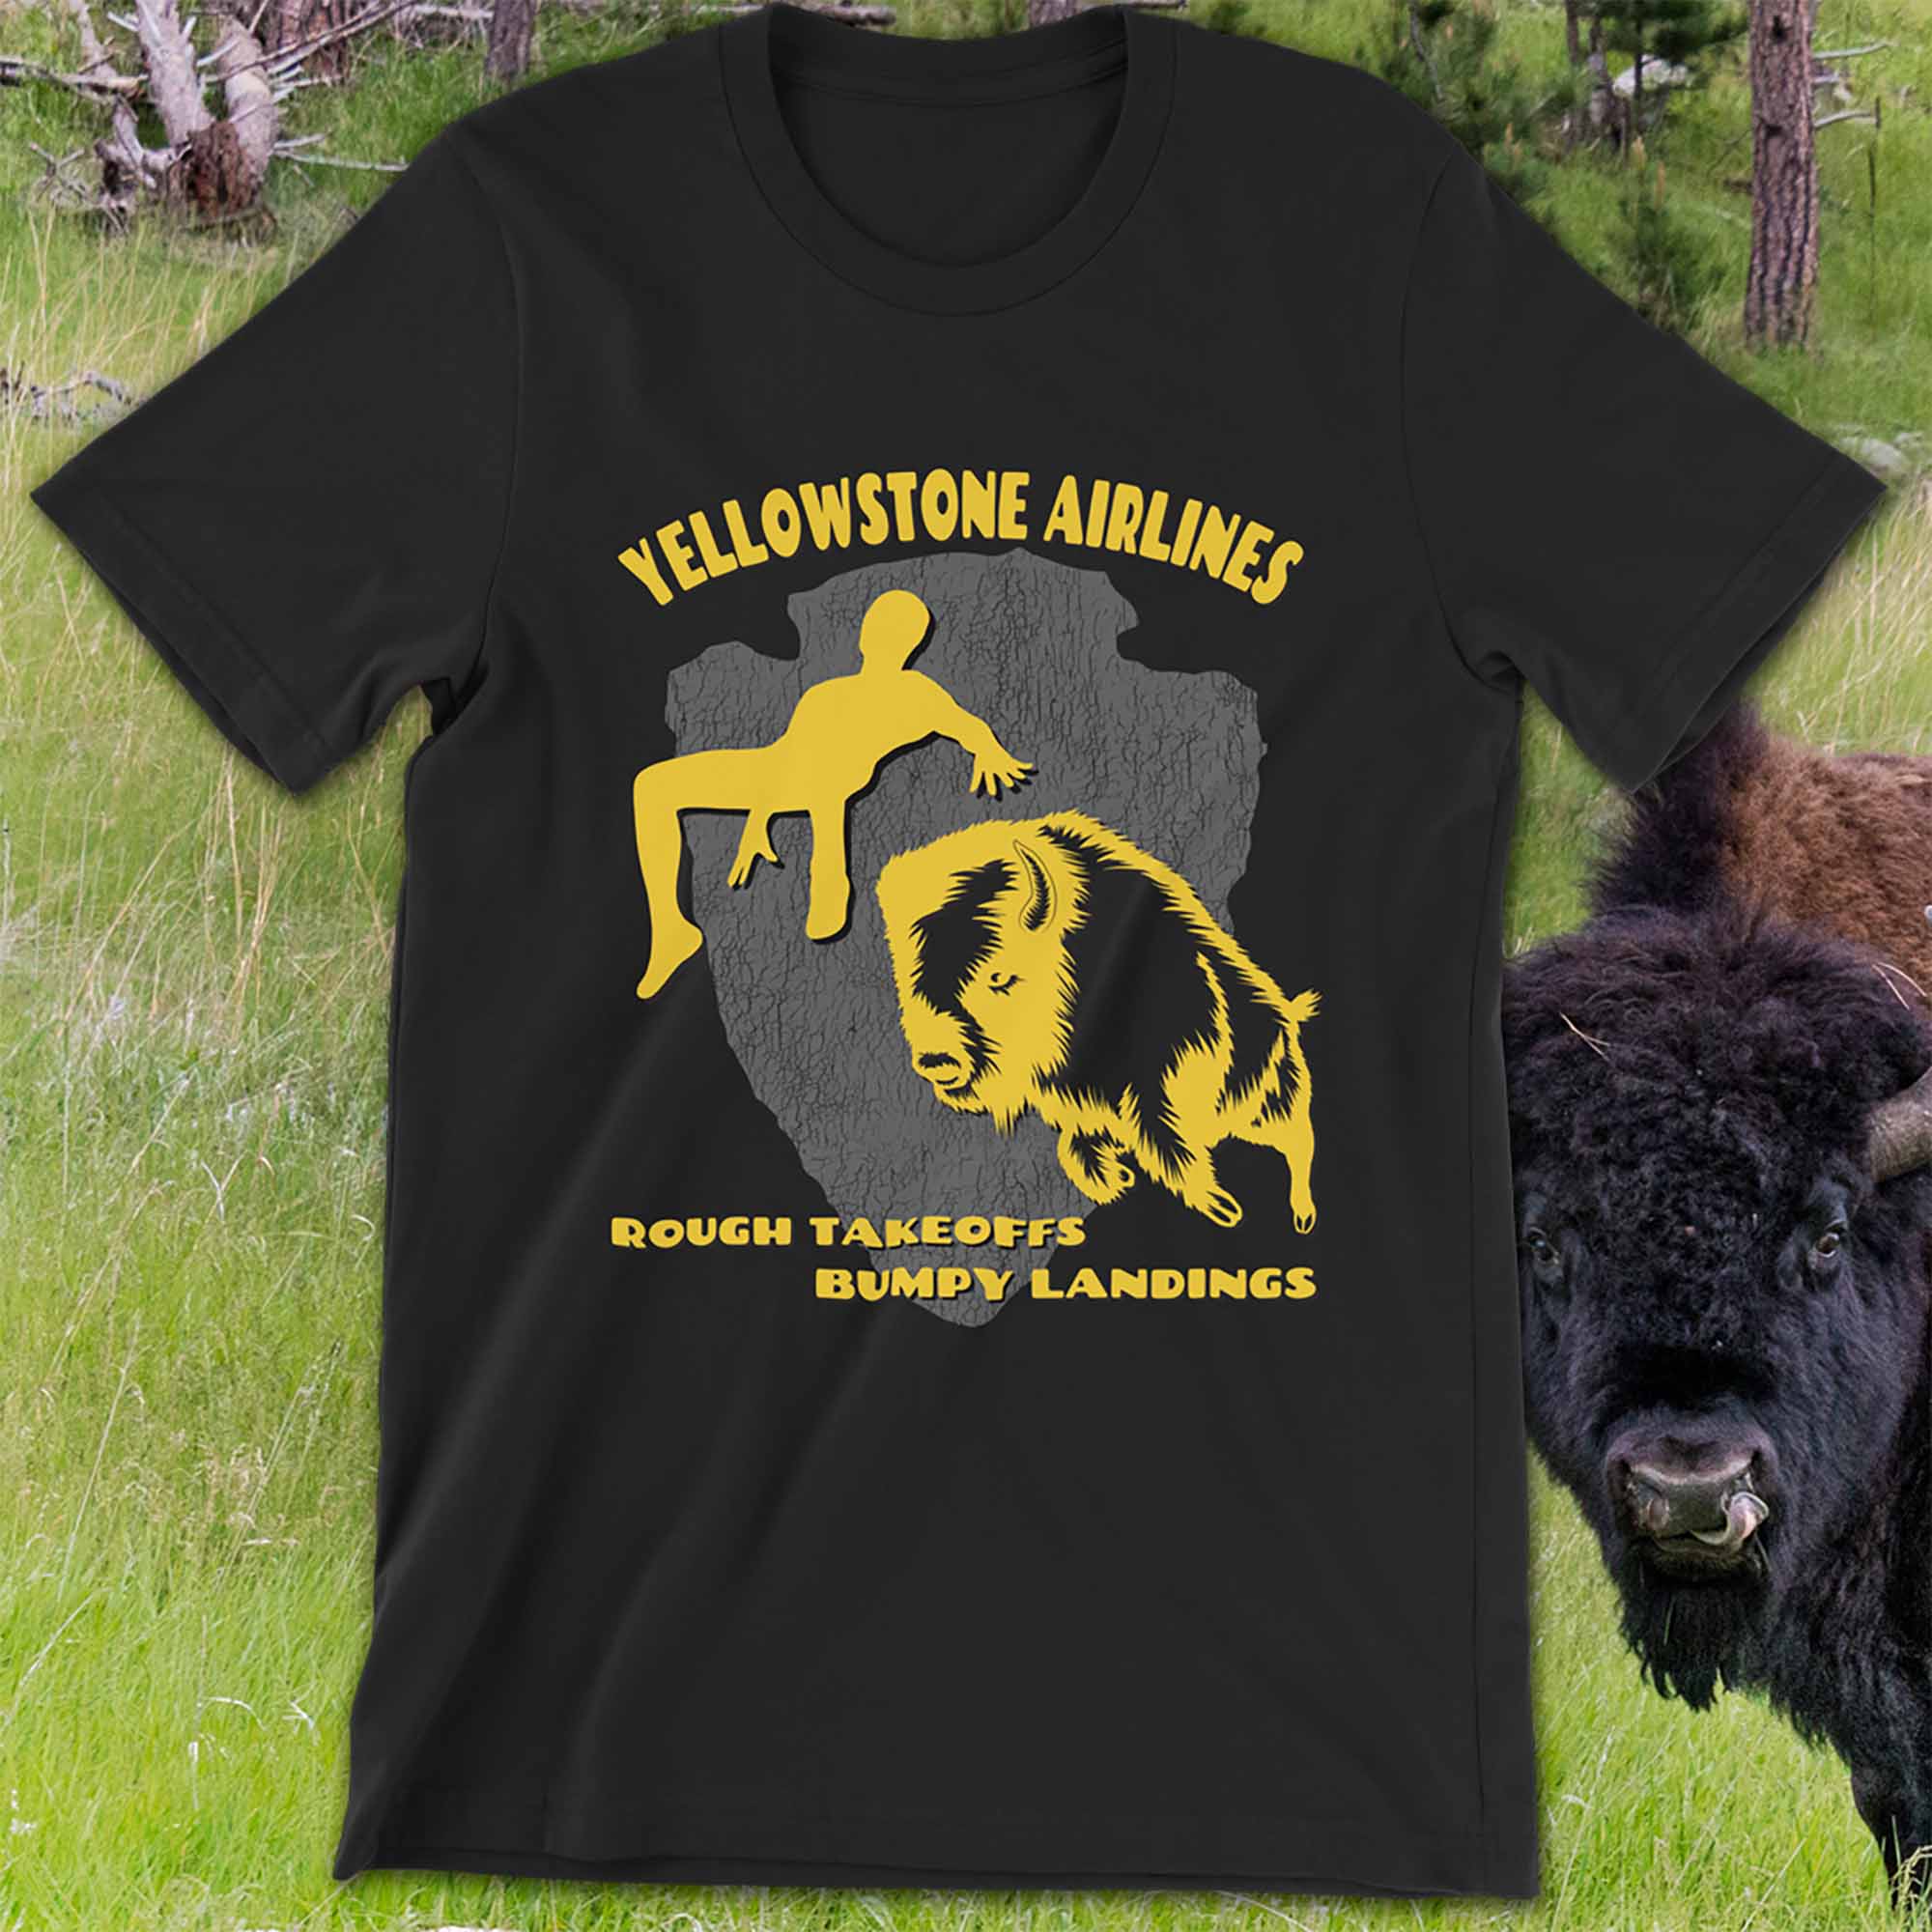 Yellowstone Airlines